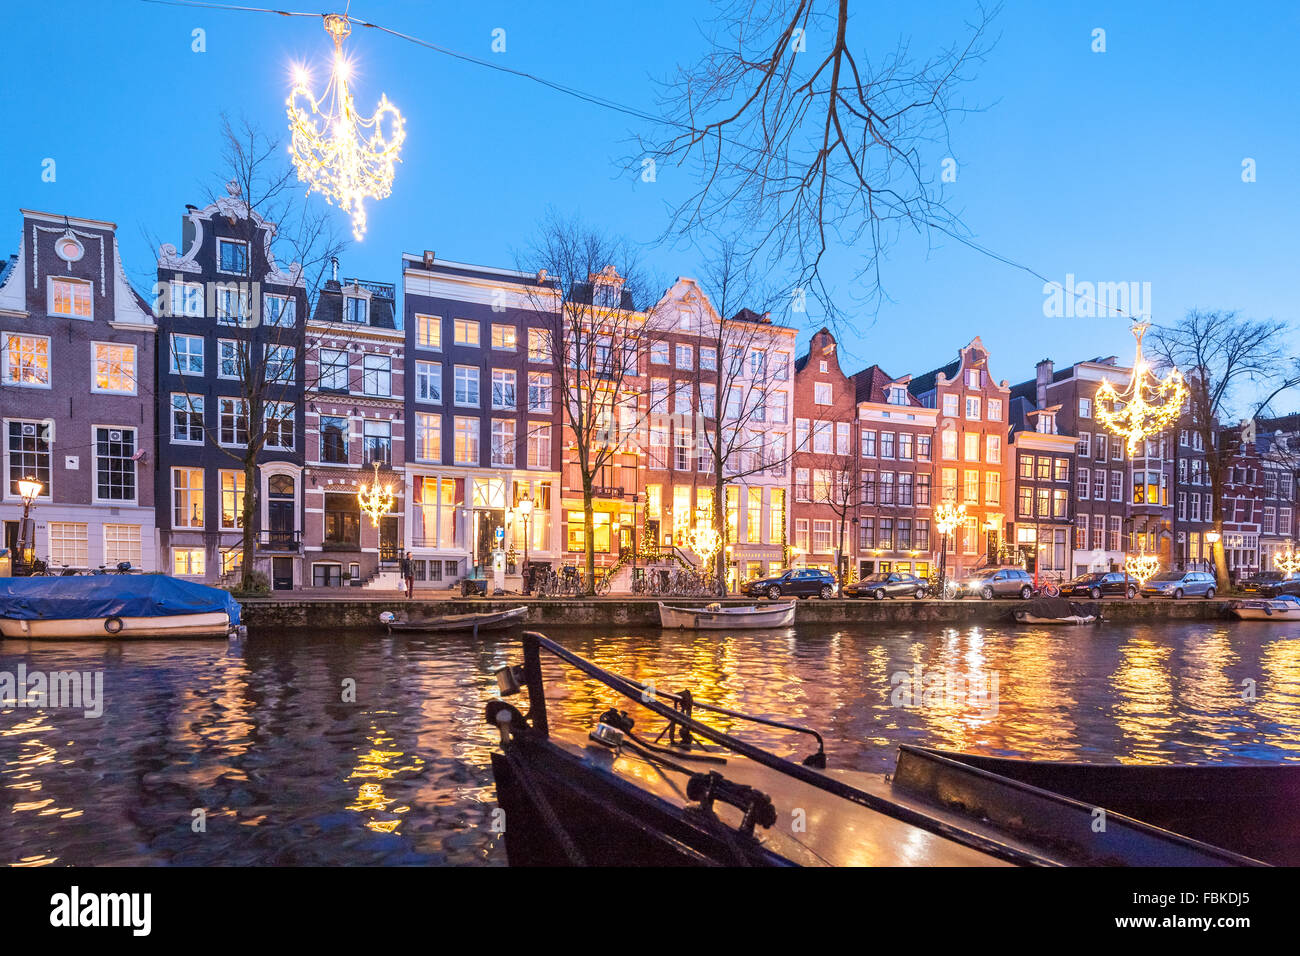 The Ambassade Hotel on the Amsterdam Herengracht Canal in winter with seasonal Christmas lights. Stock Photo